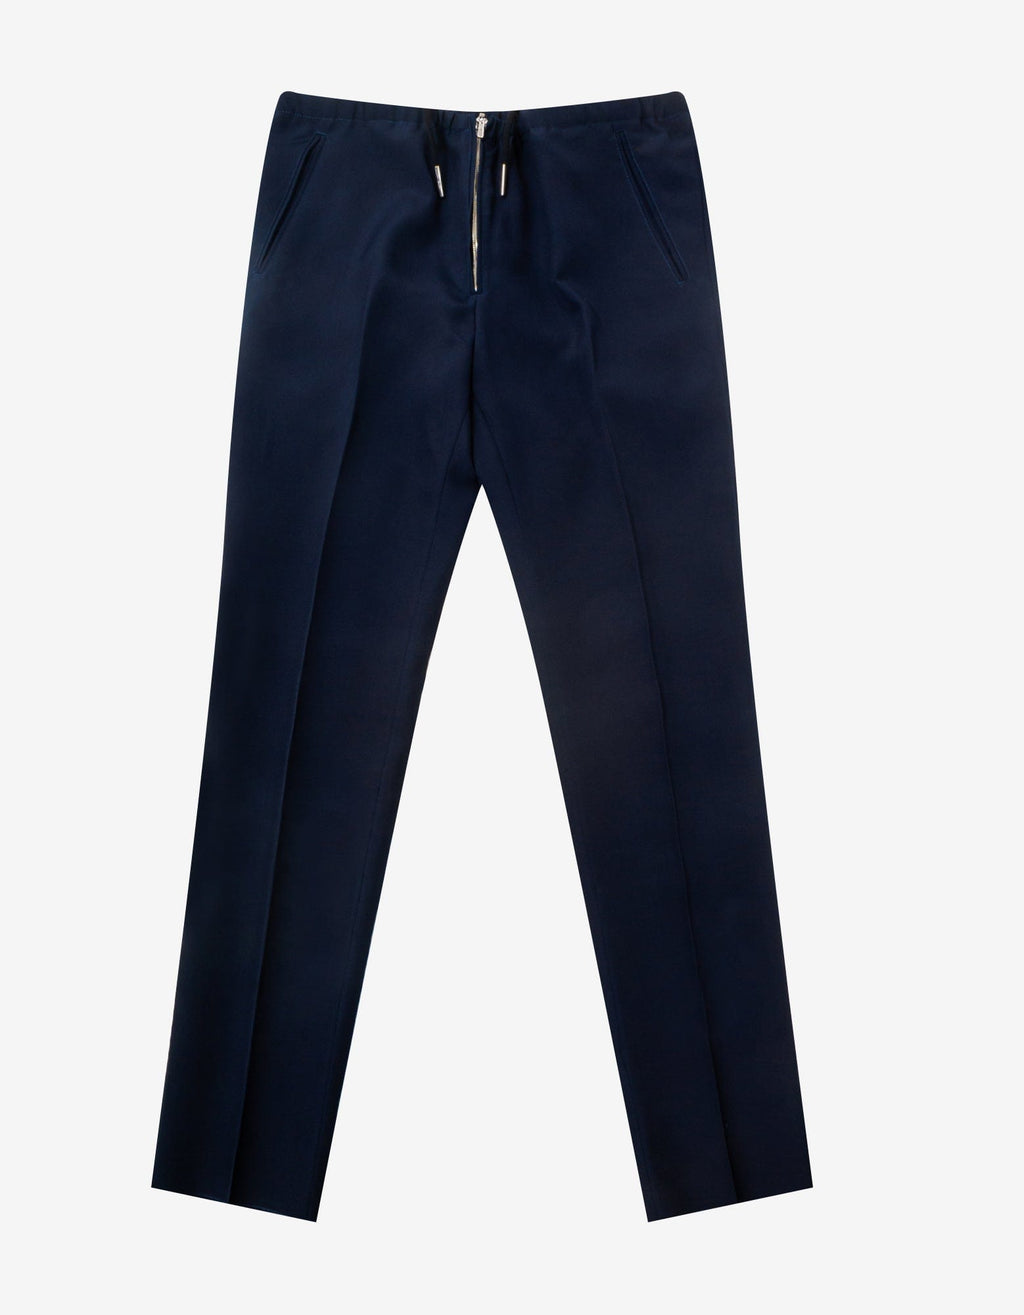 Givenchy Givenchy Navy Blue Wool Trousers